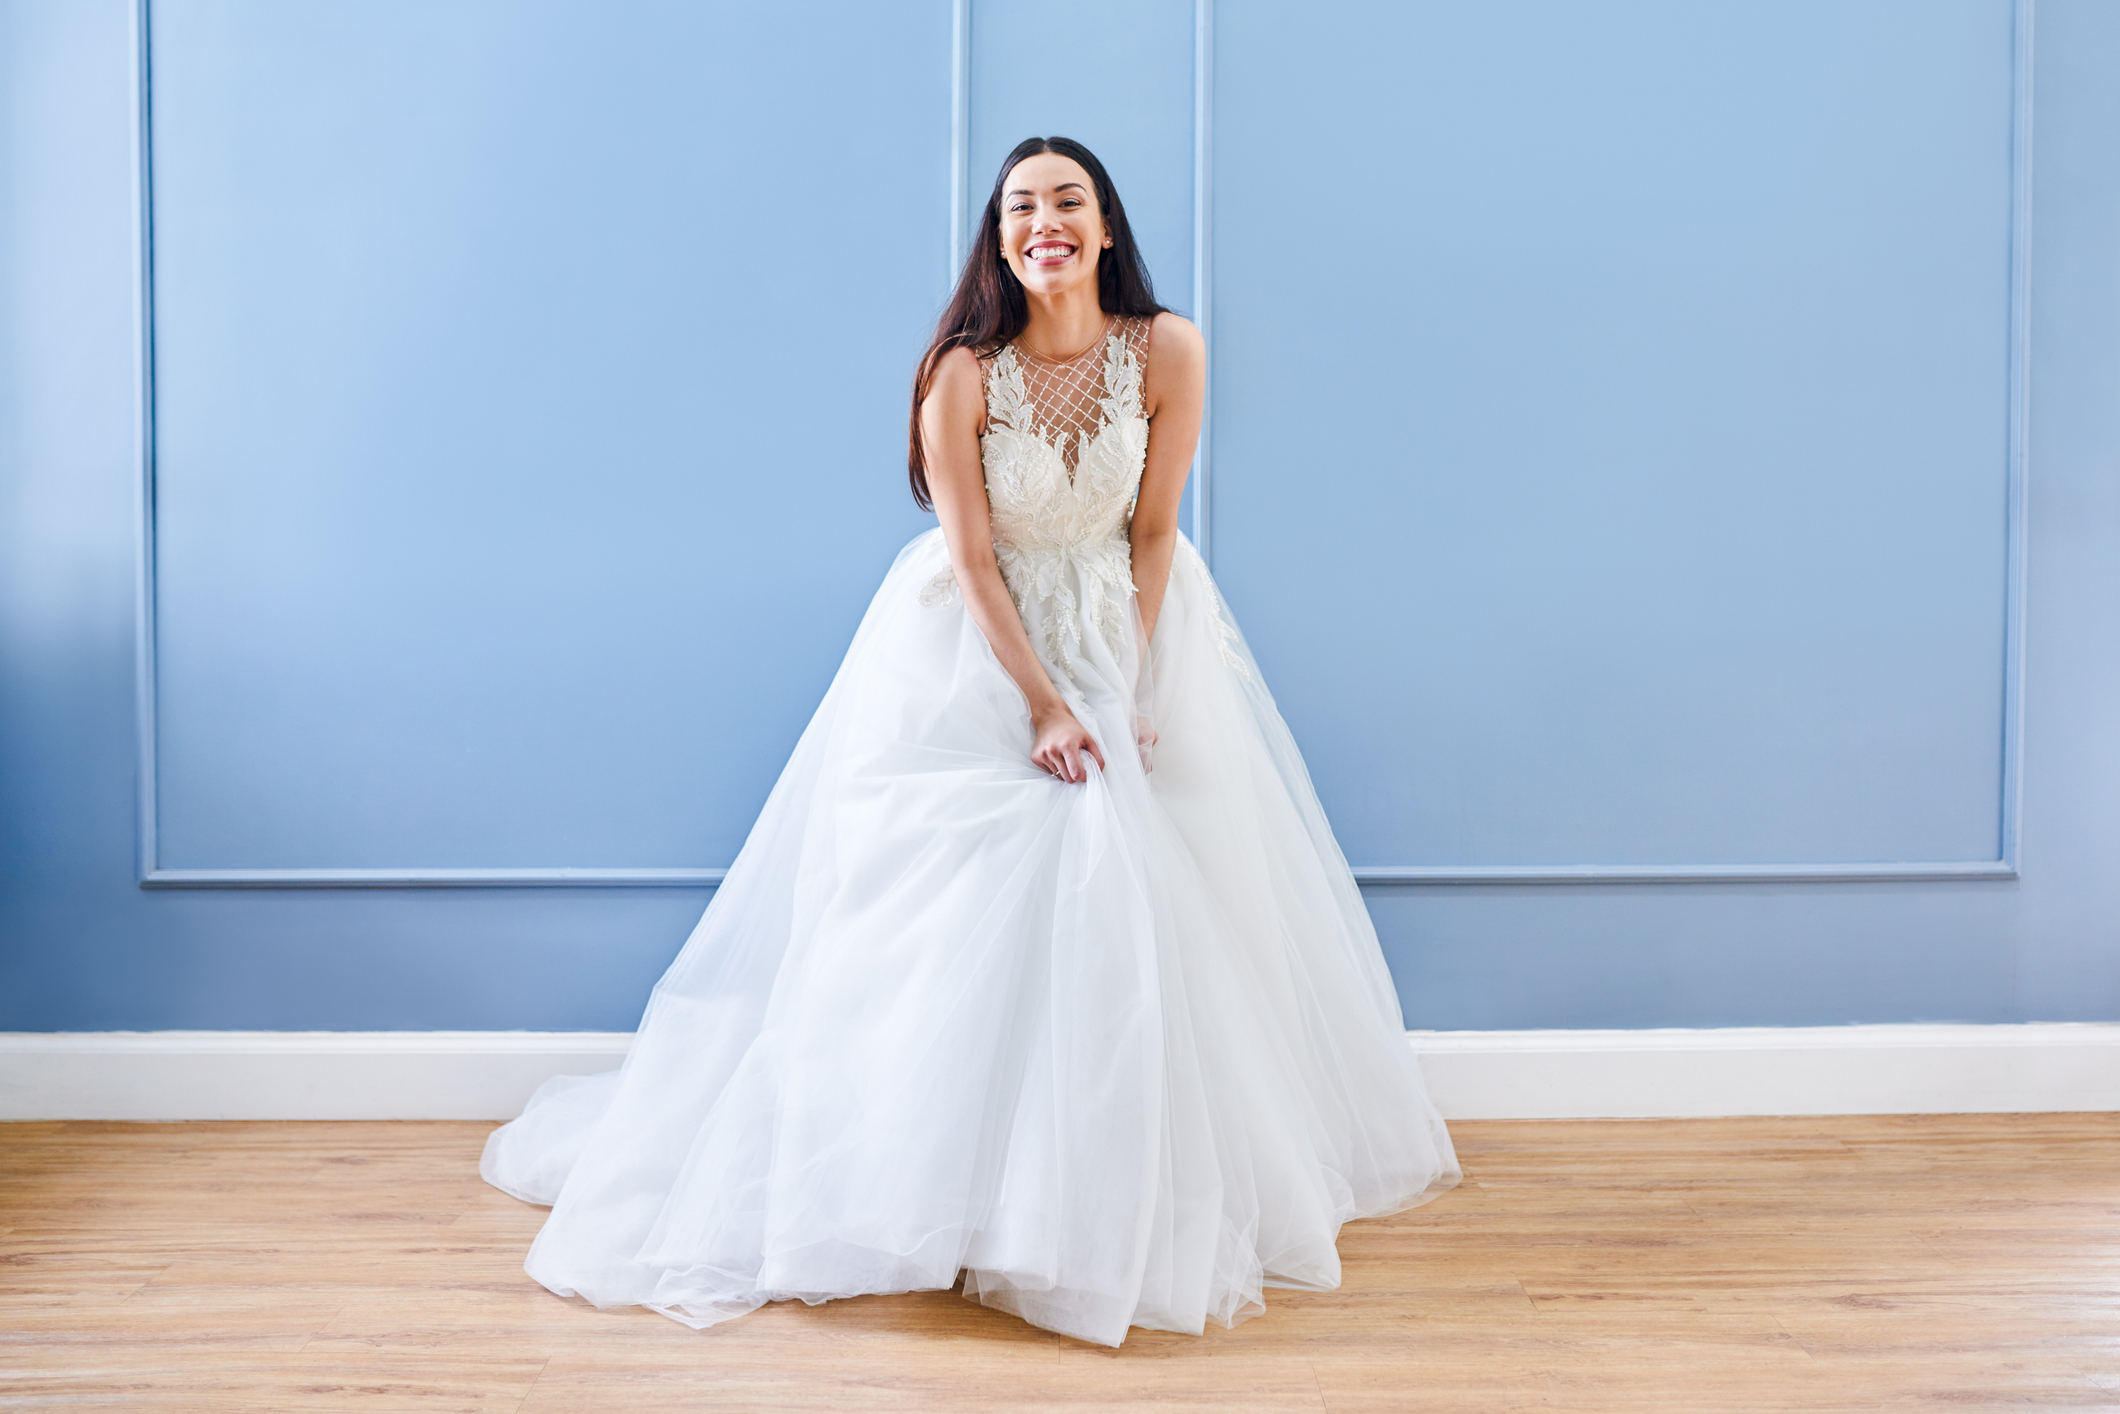 companys that donate wedding dress and shoes to nonprofits